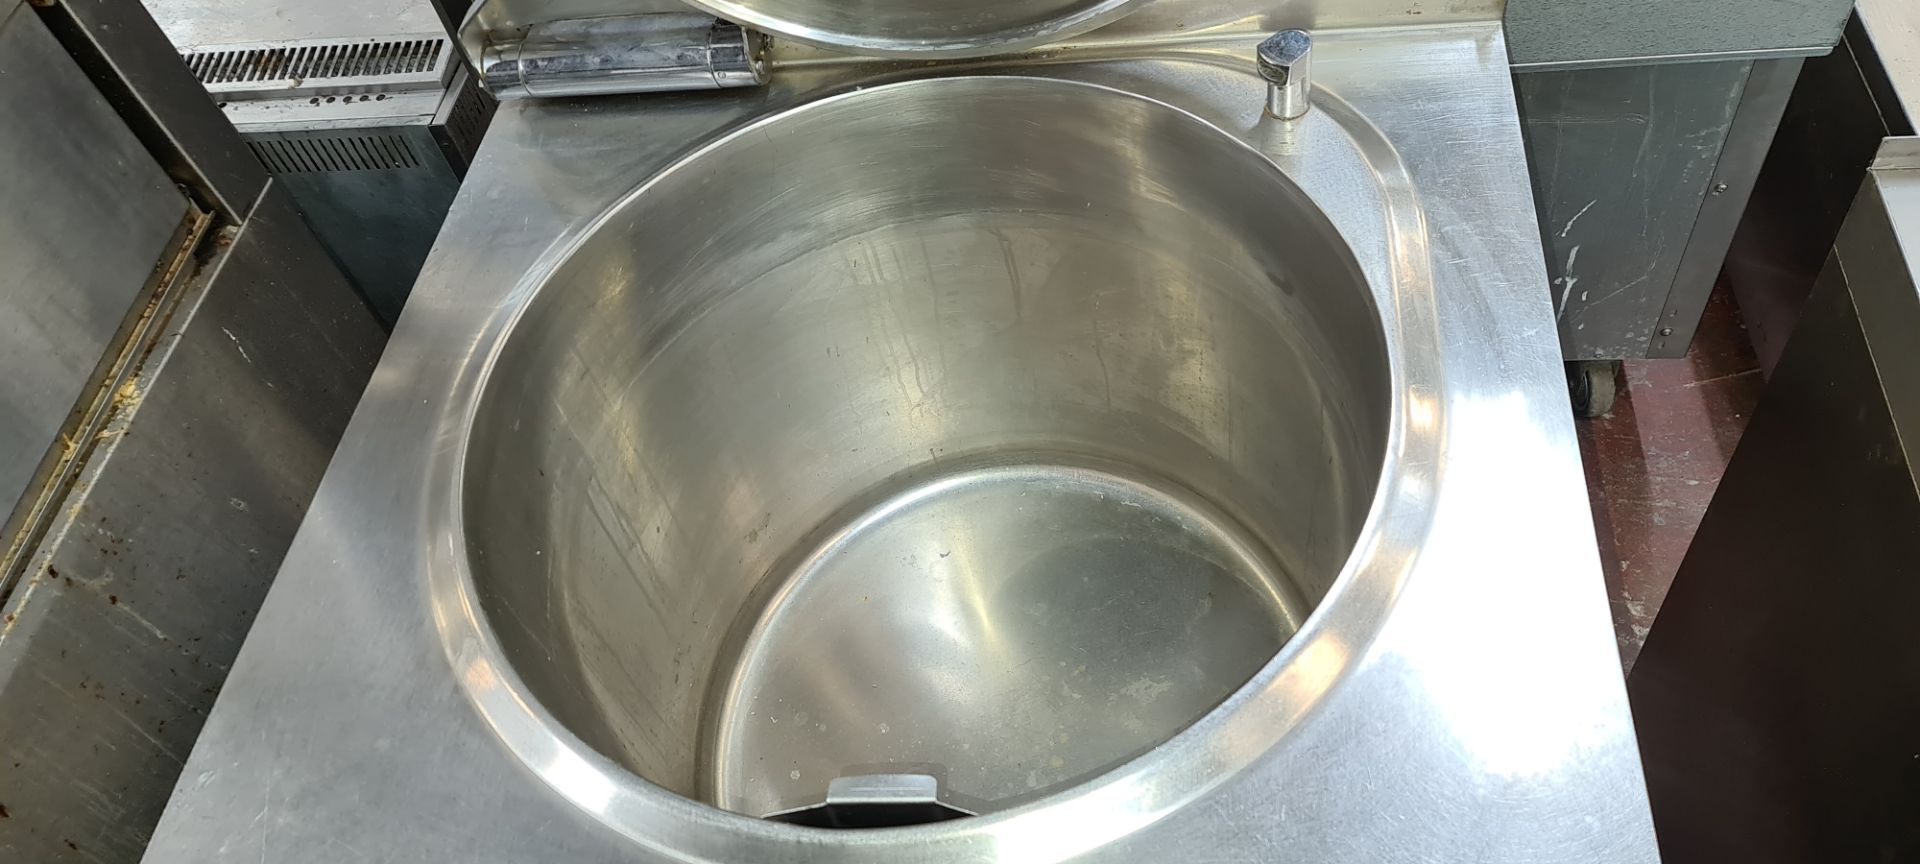 Stainless steel floor standing large pressure cooker system - Image 3 of 4